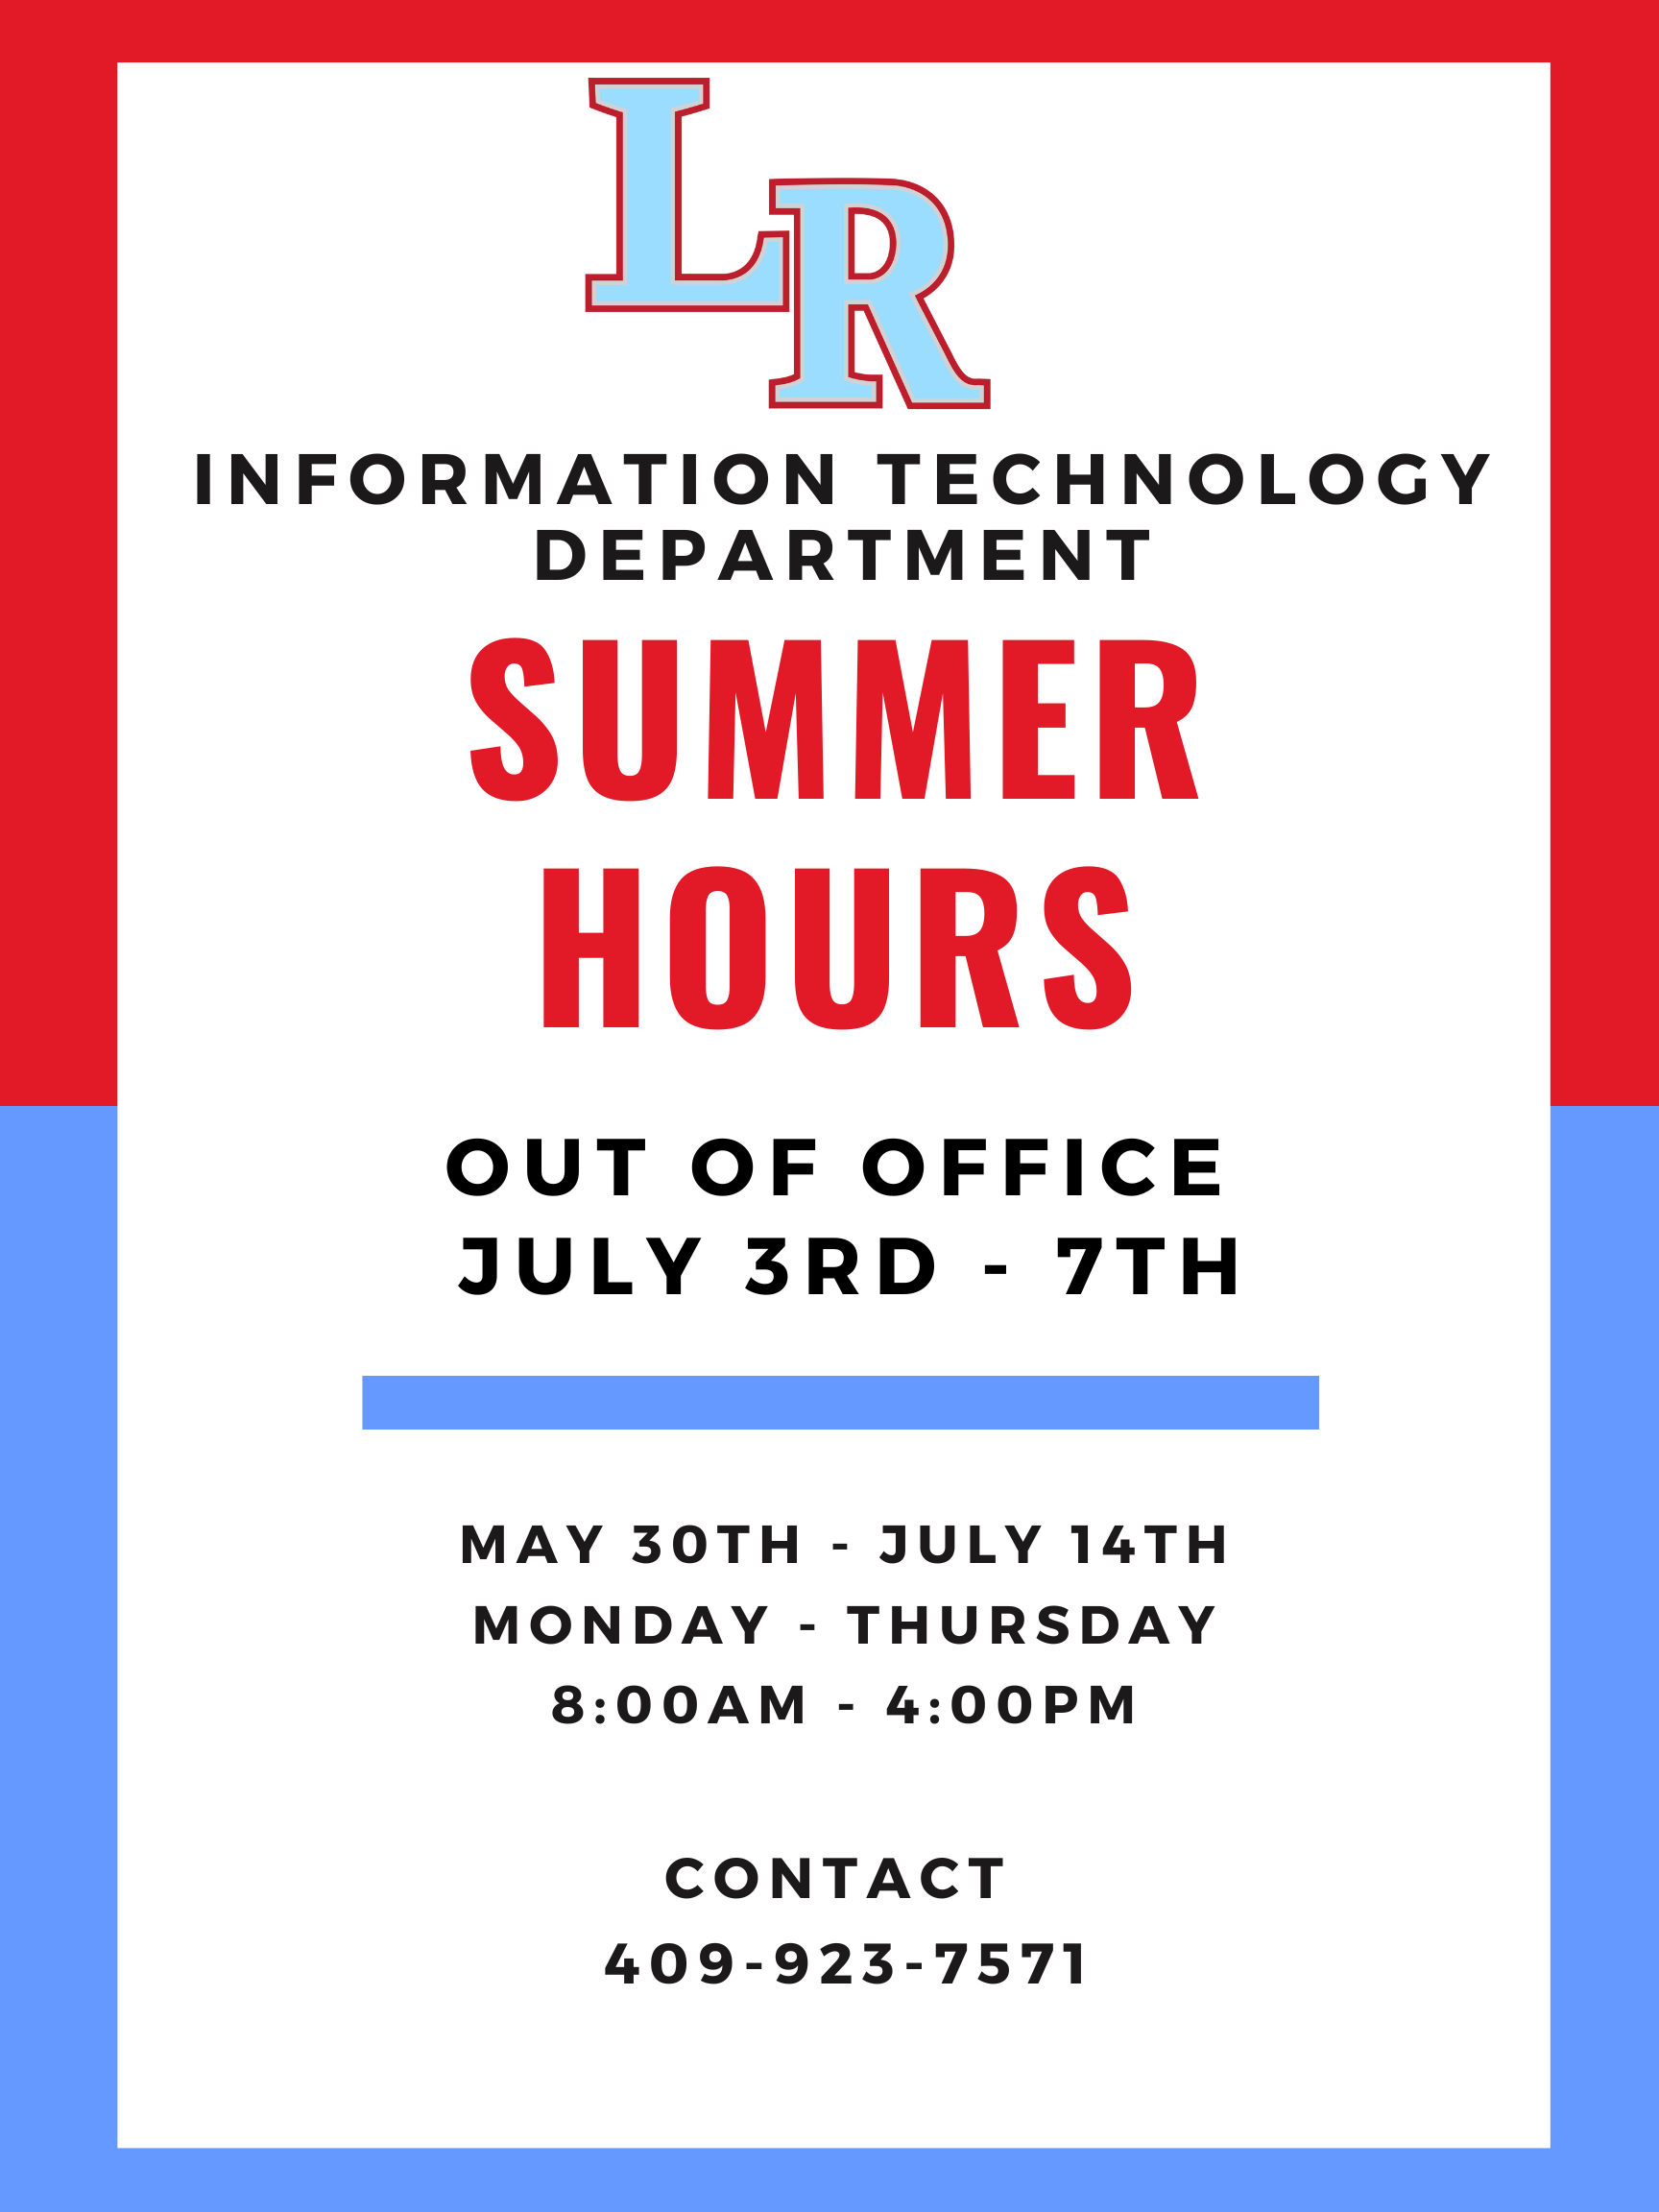 Information Technology Summer Hours